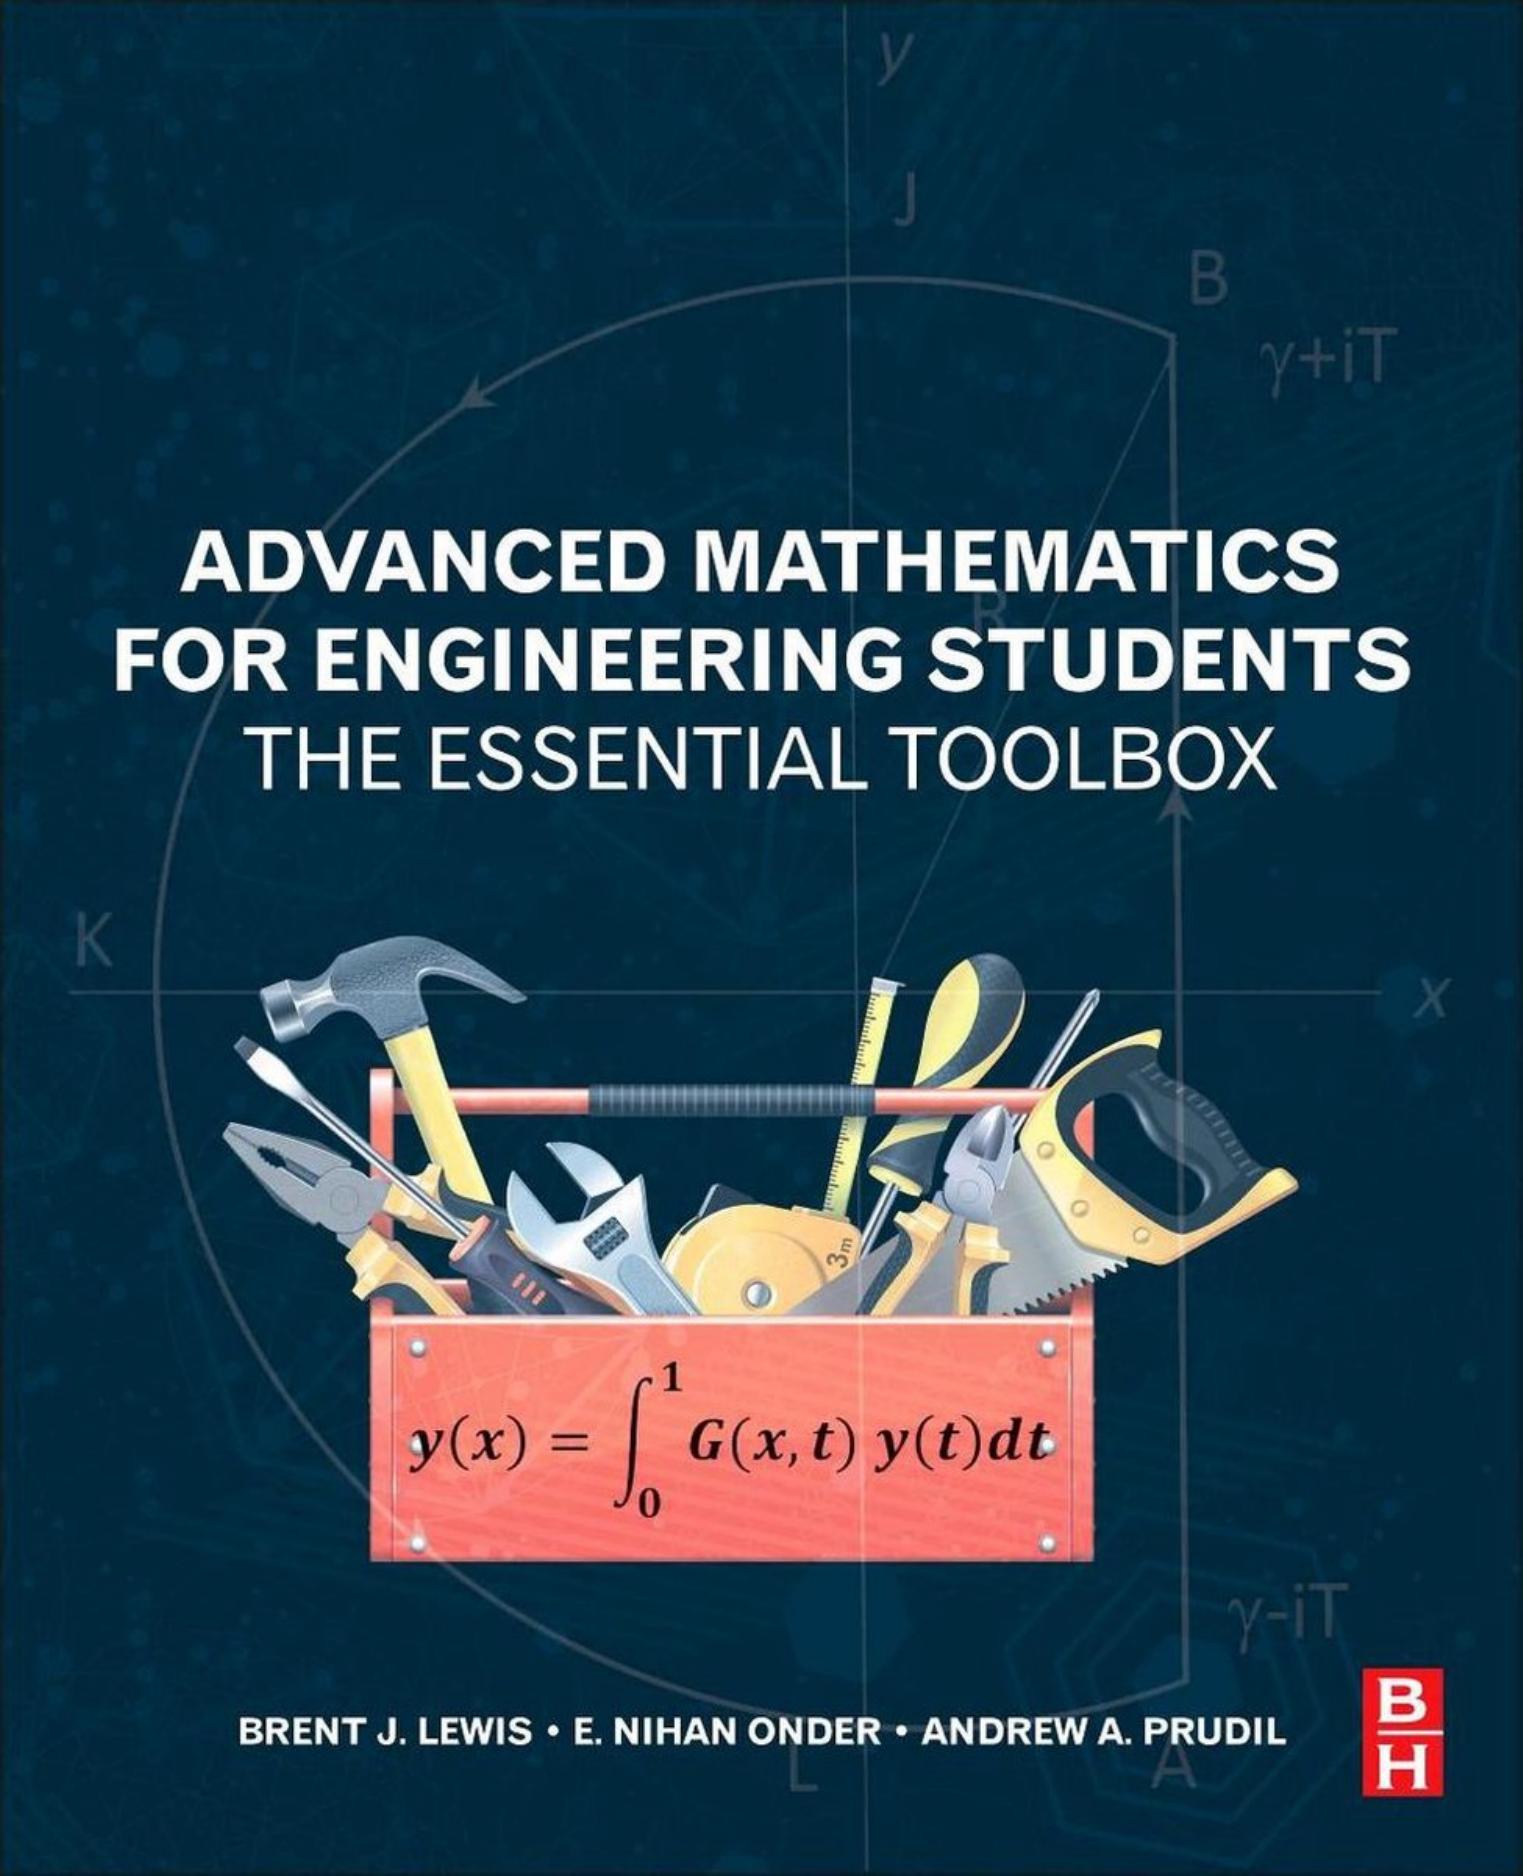 Advanced Mathematics for Engineering Students: The Essential Toolbox